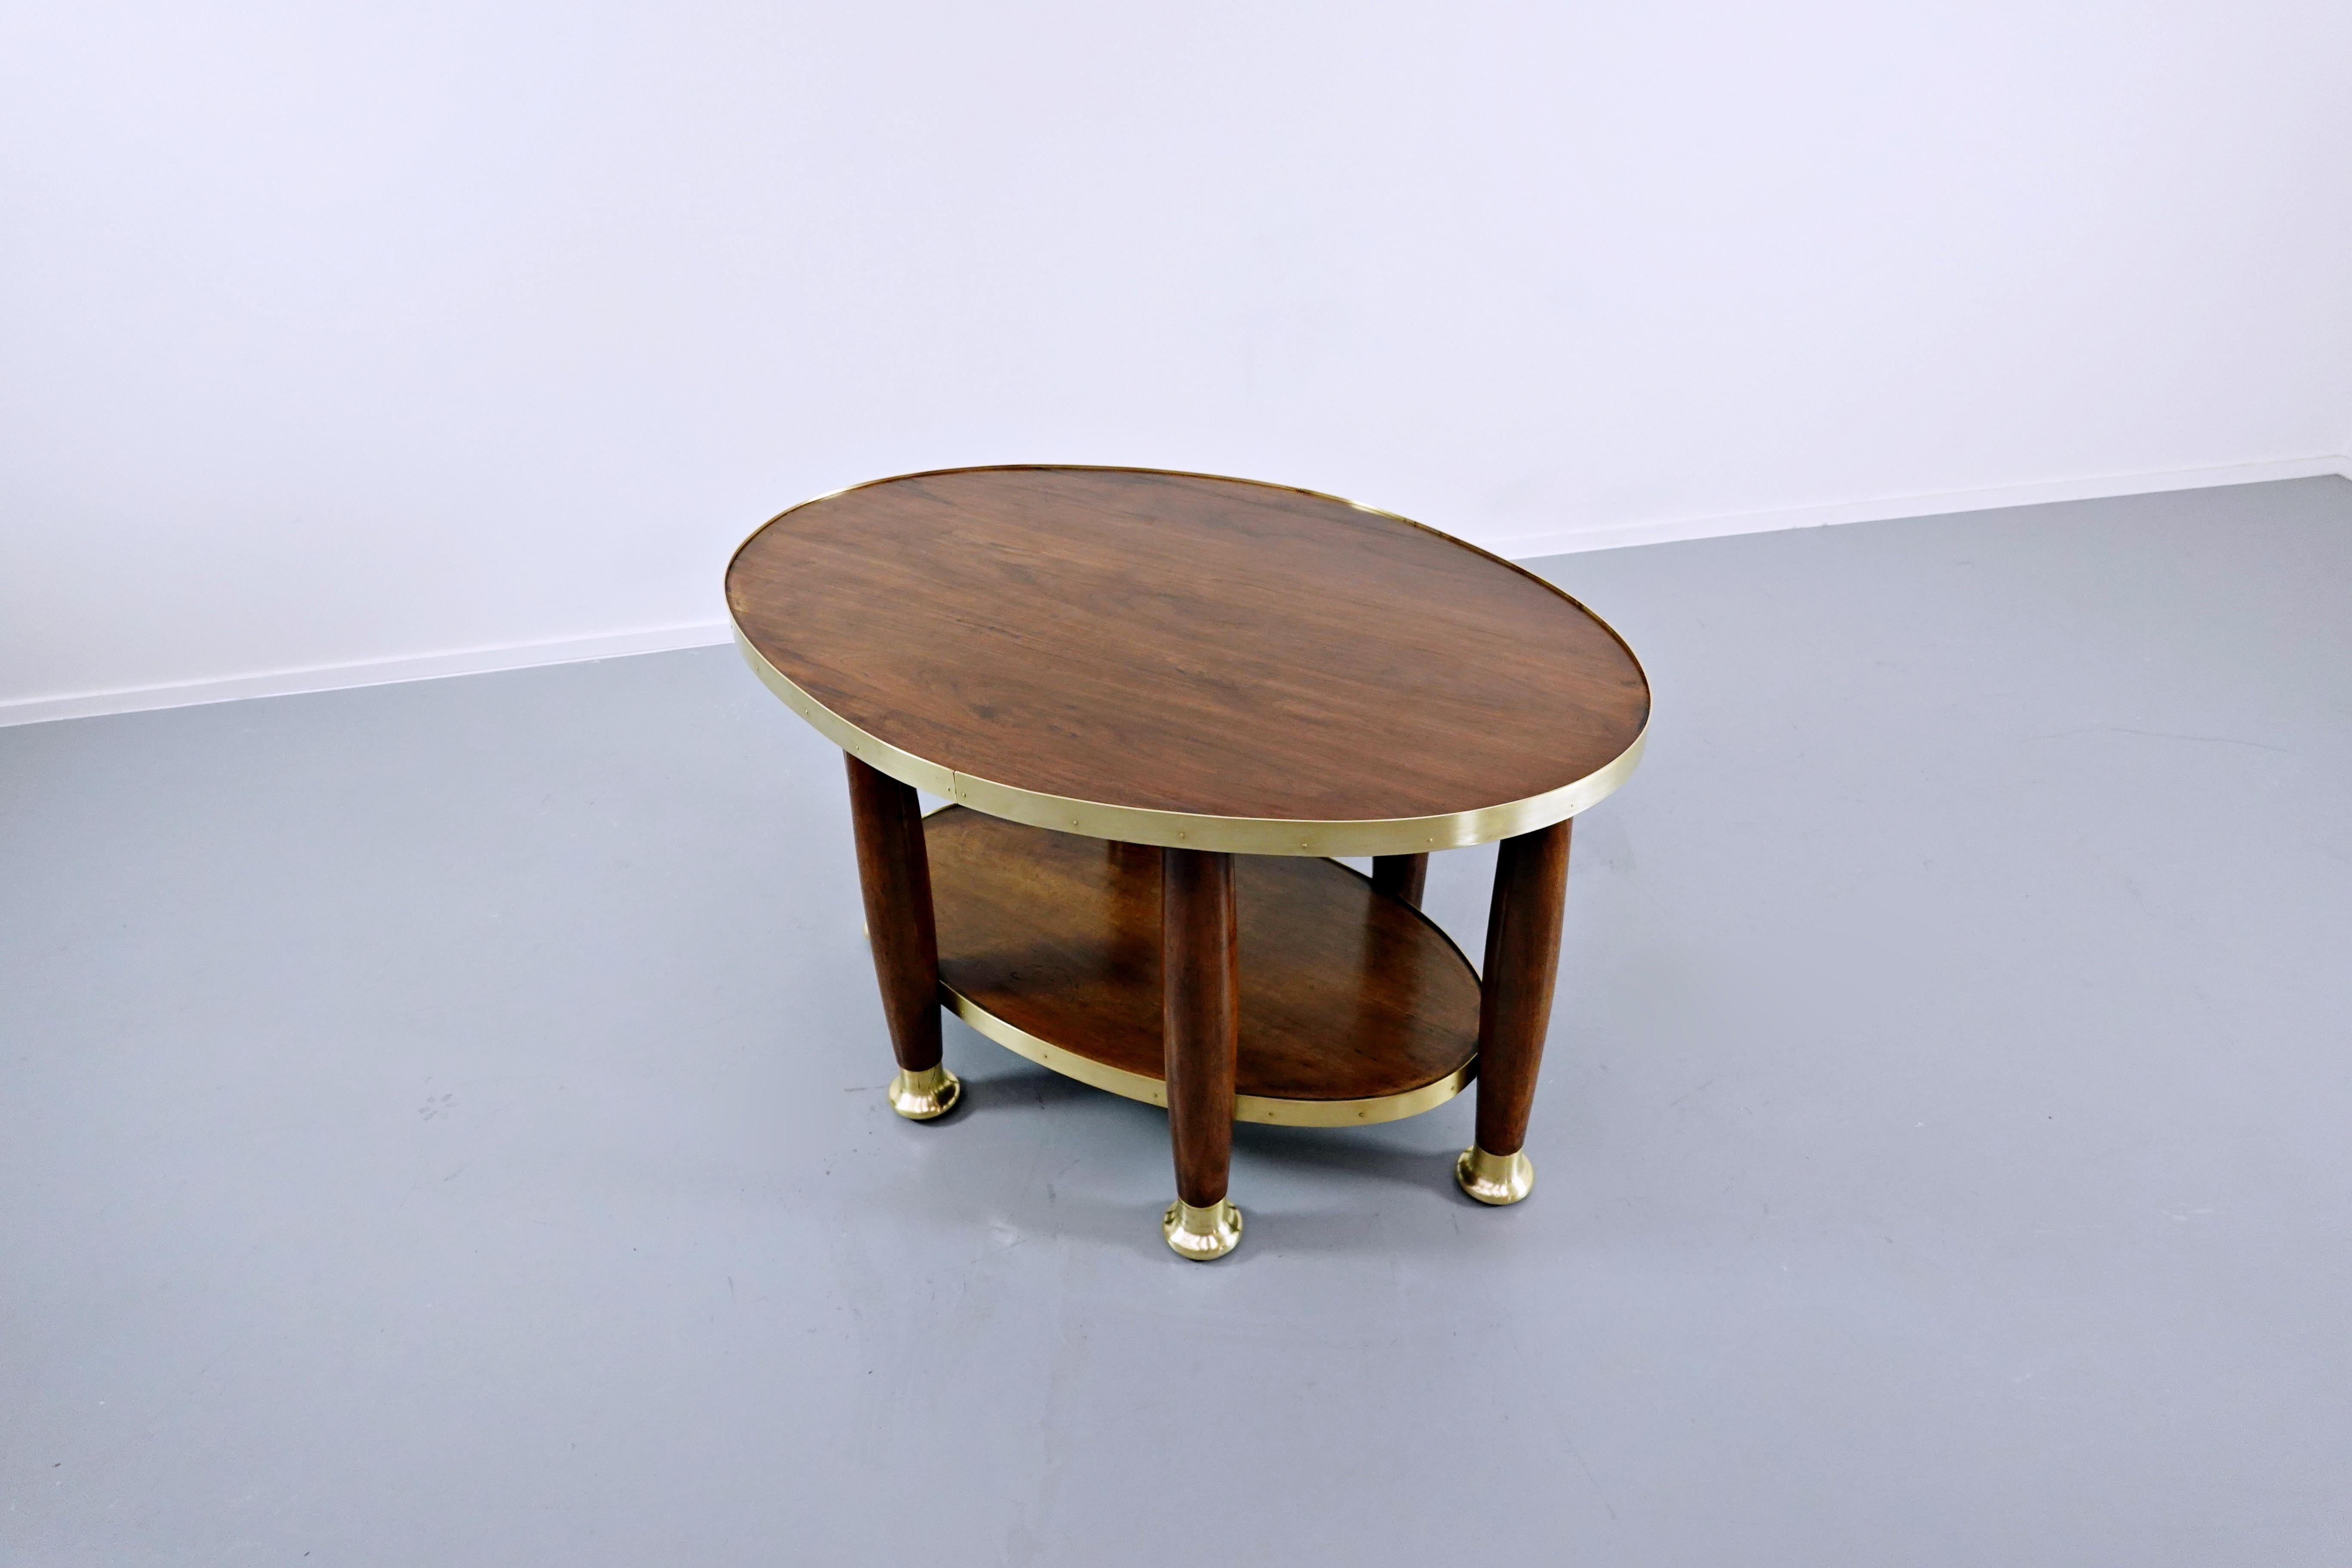 Art Nouveau Table in the Style of Adolf Loos, Wood and Brass, circa 1910 For Sale 6